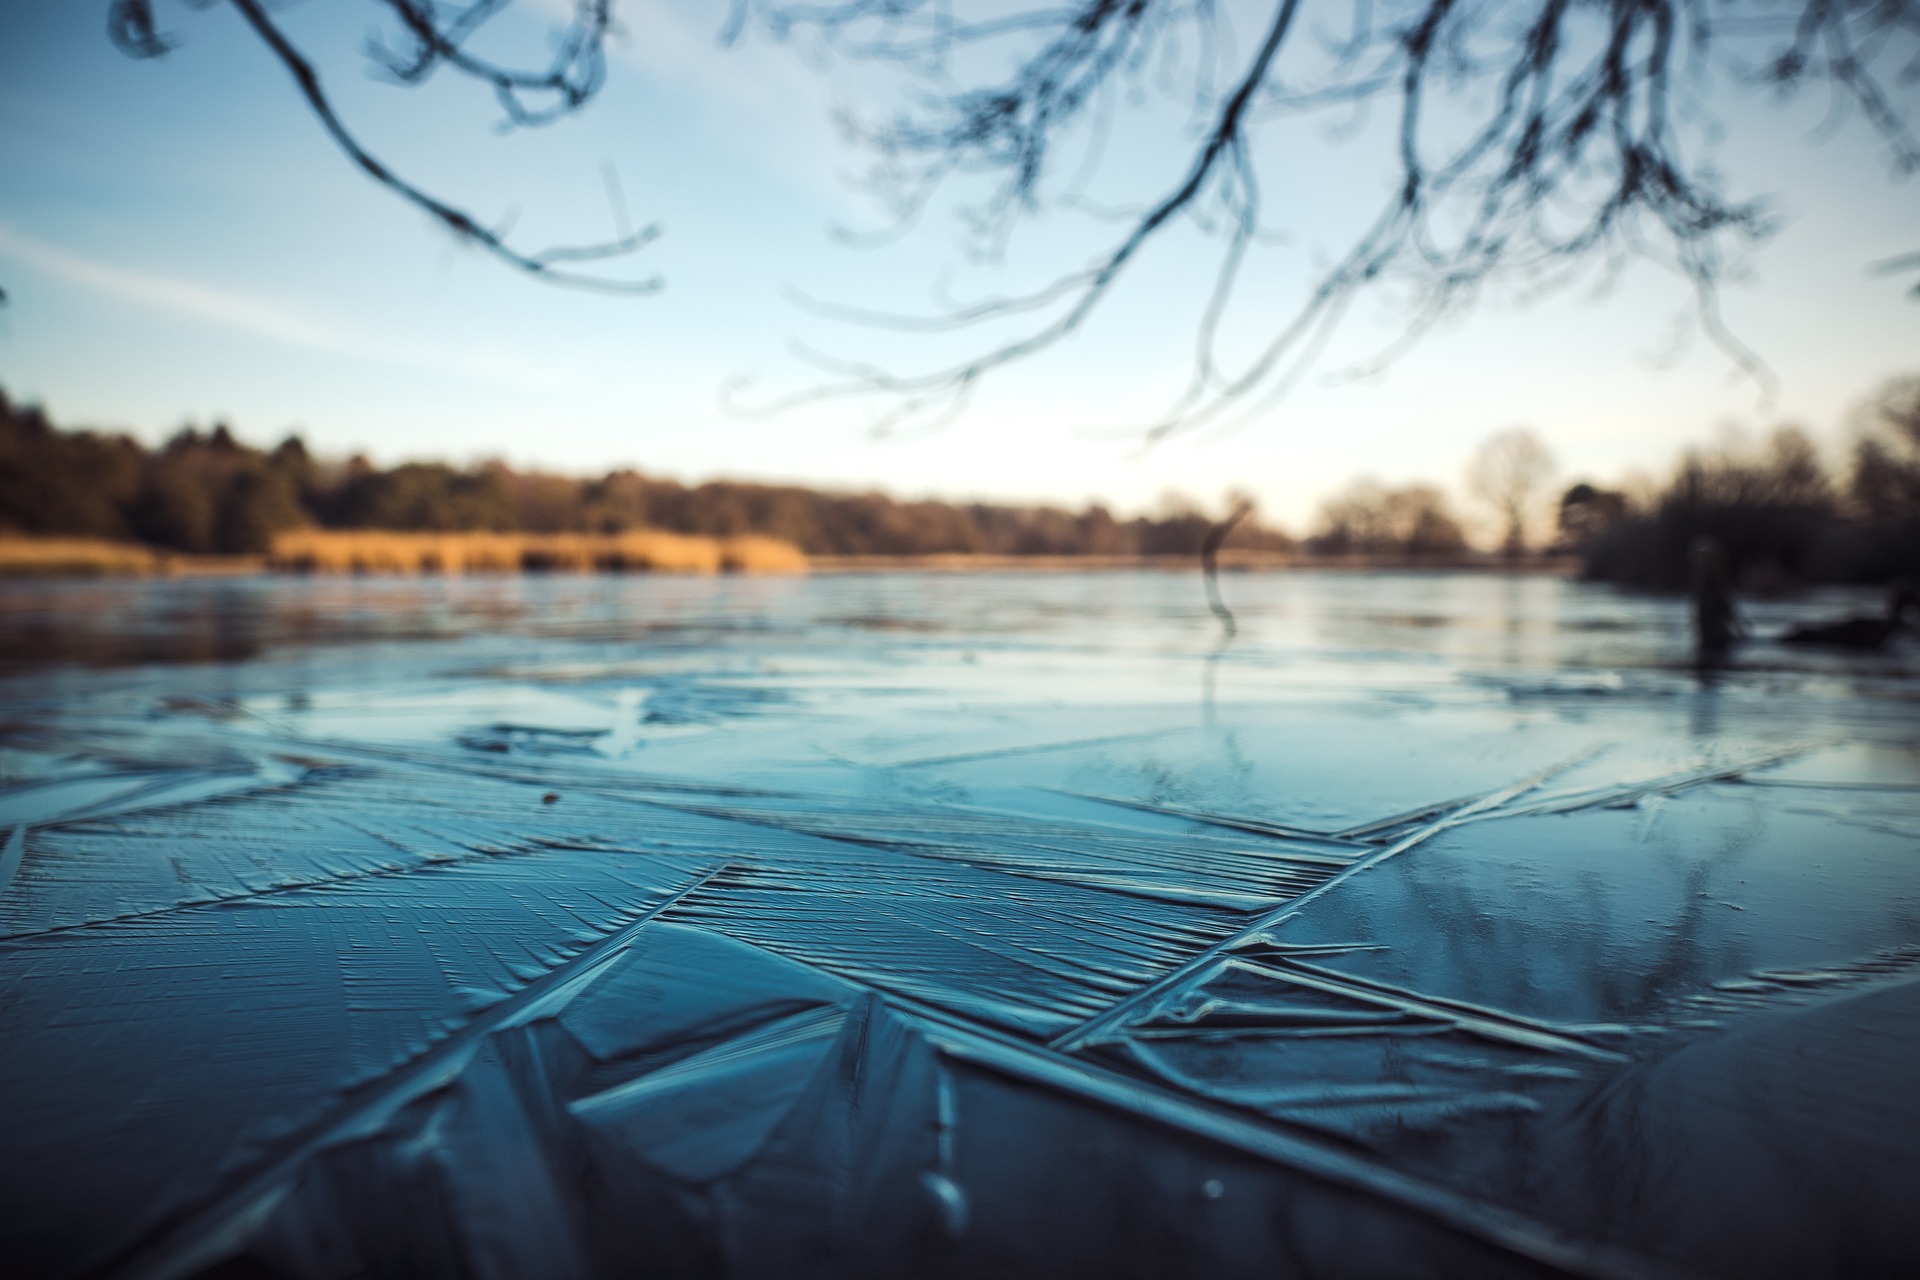 Thin ice on a lake with trees in the background